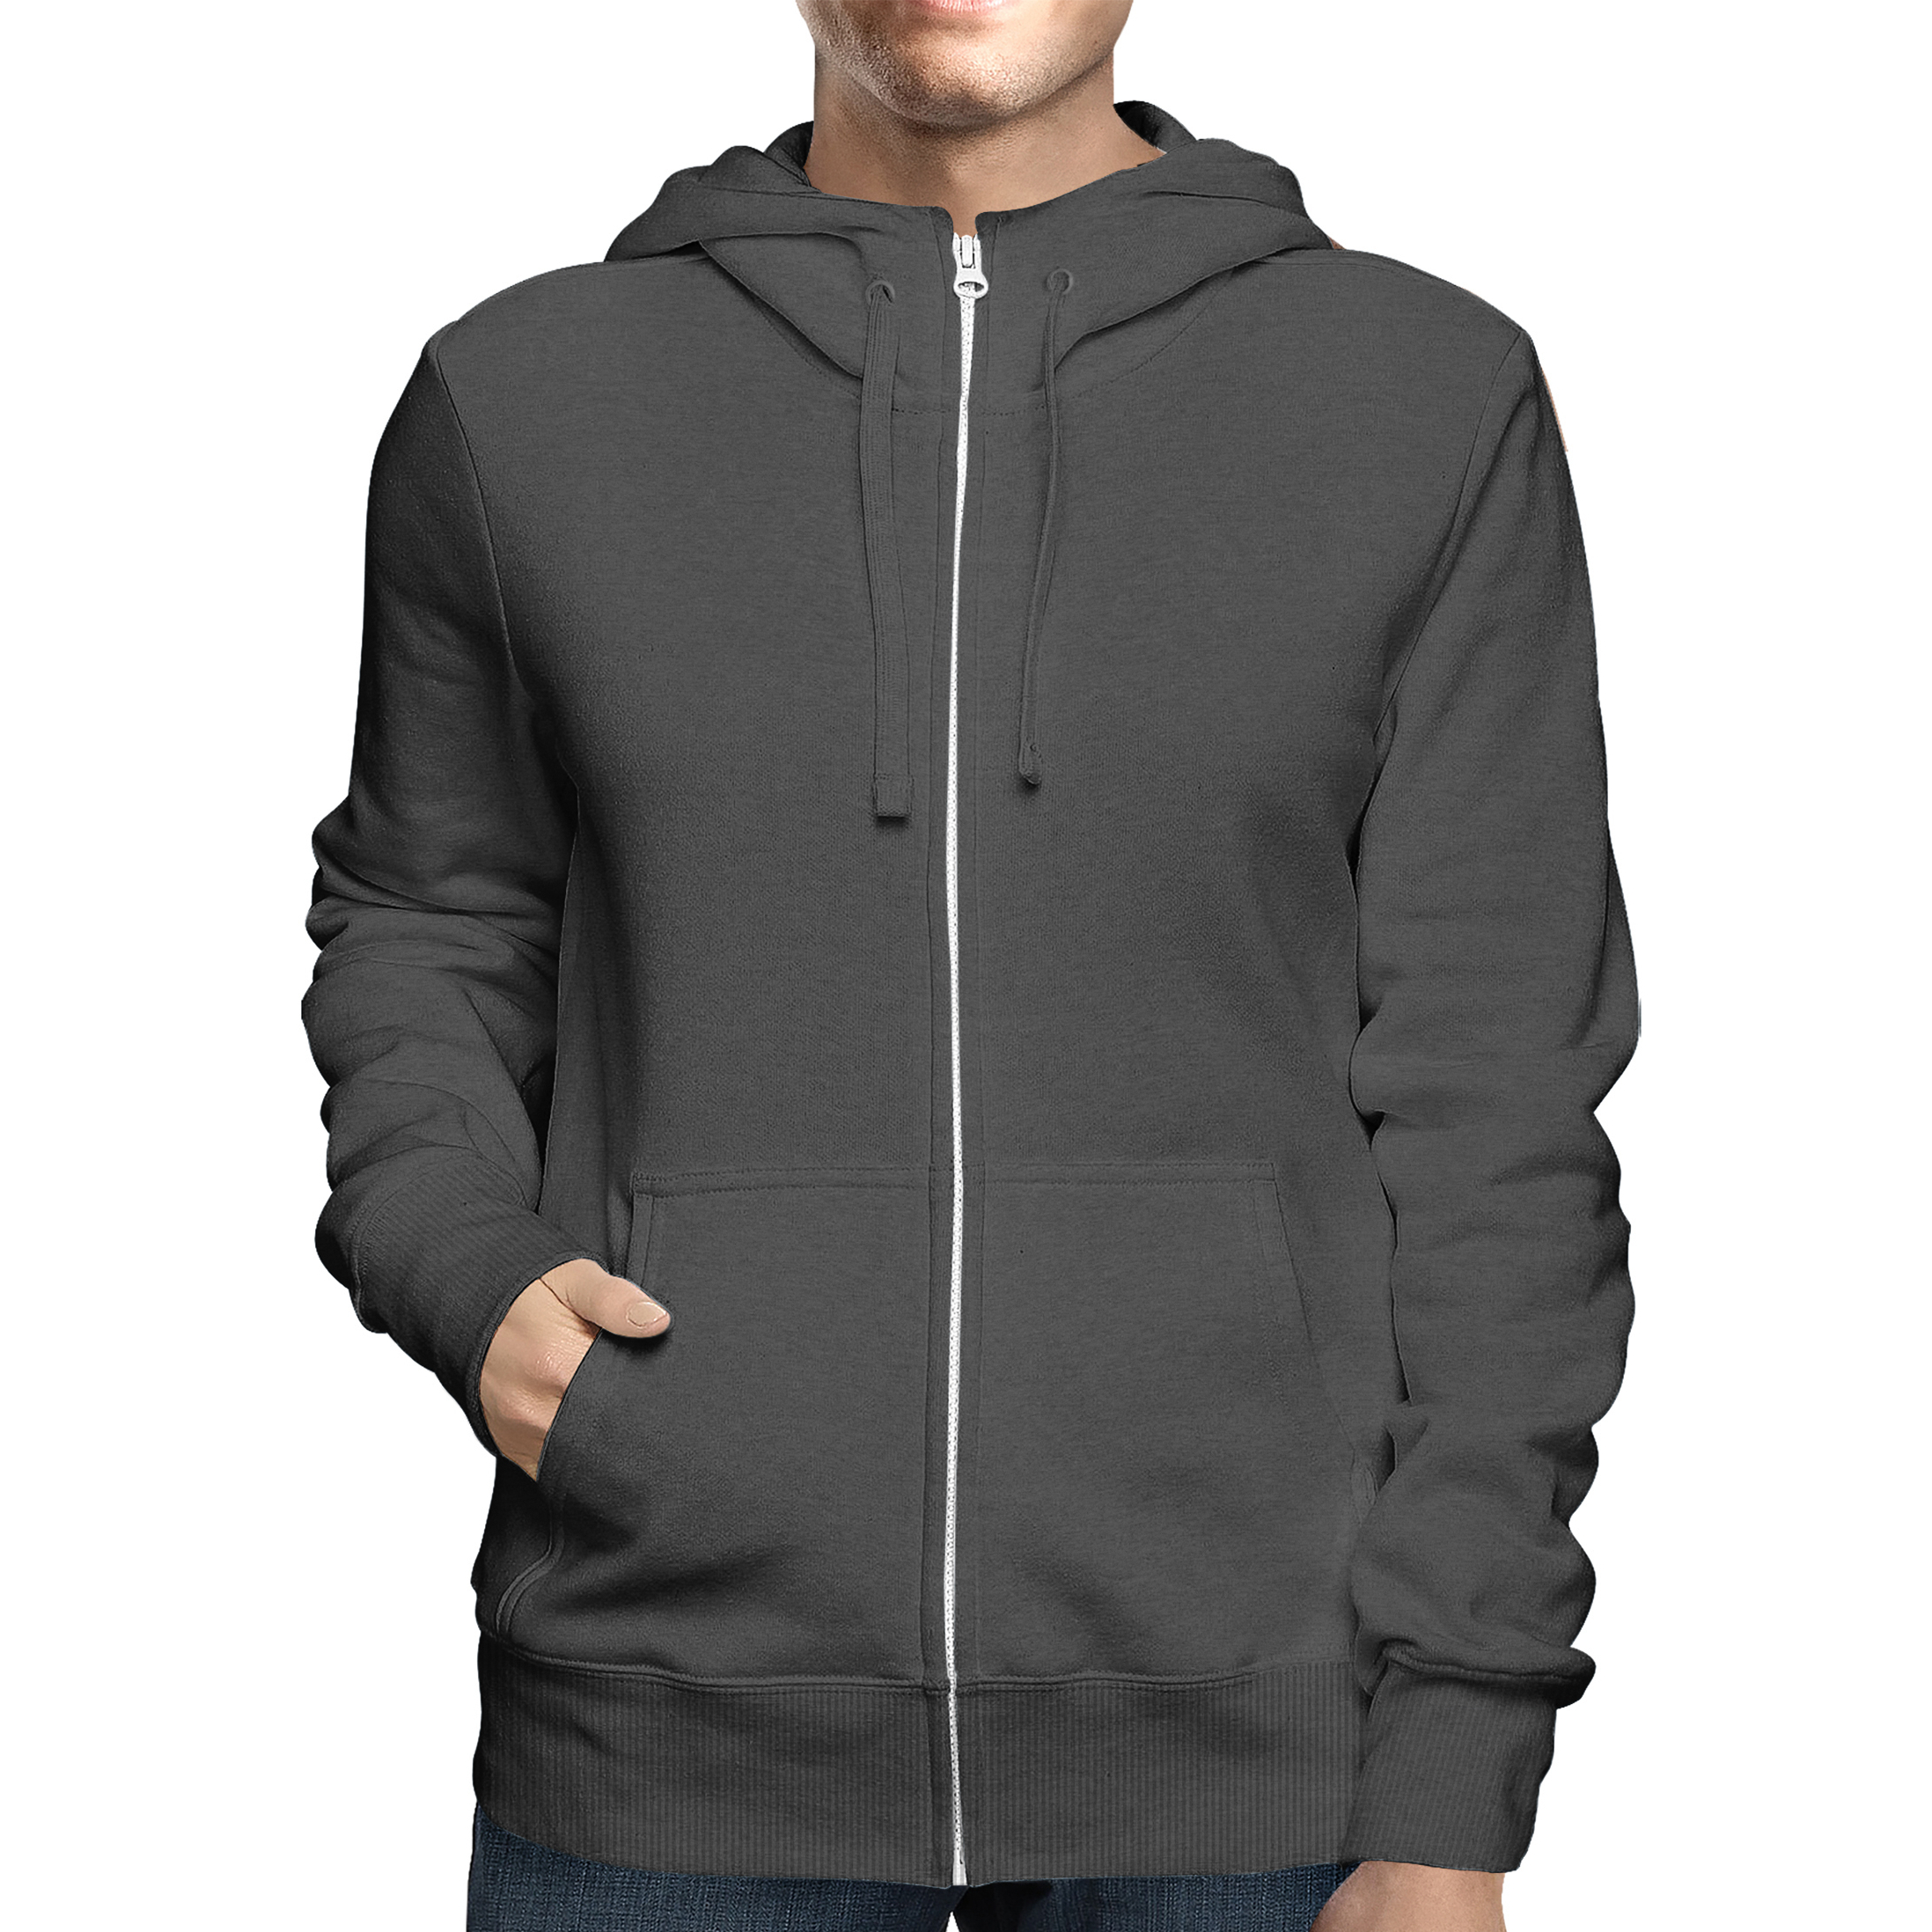 2-Pack: Men's Full Zip Up Fleece-Lined Hoodie Sweatshirt (Big & Tall Size Available) - Charcoal, X-large